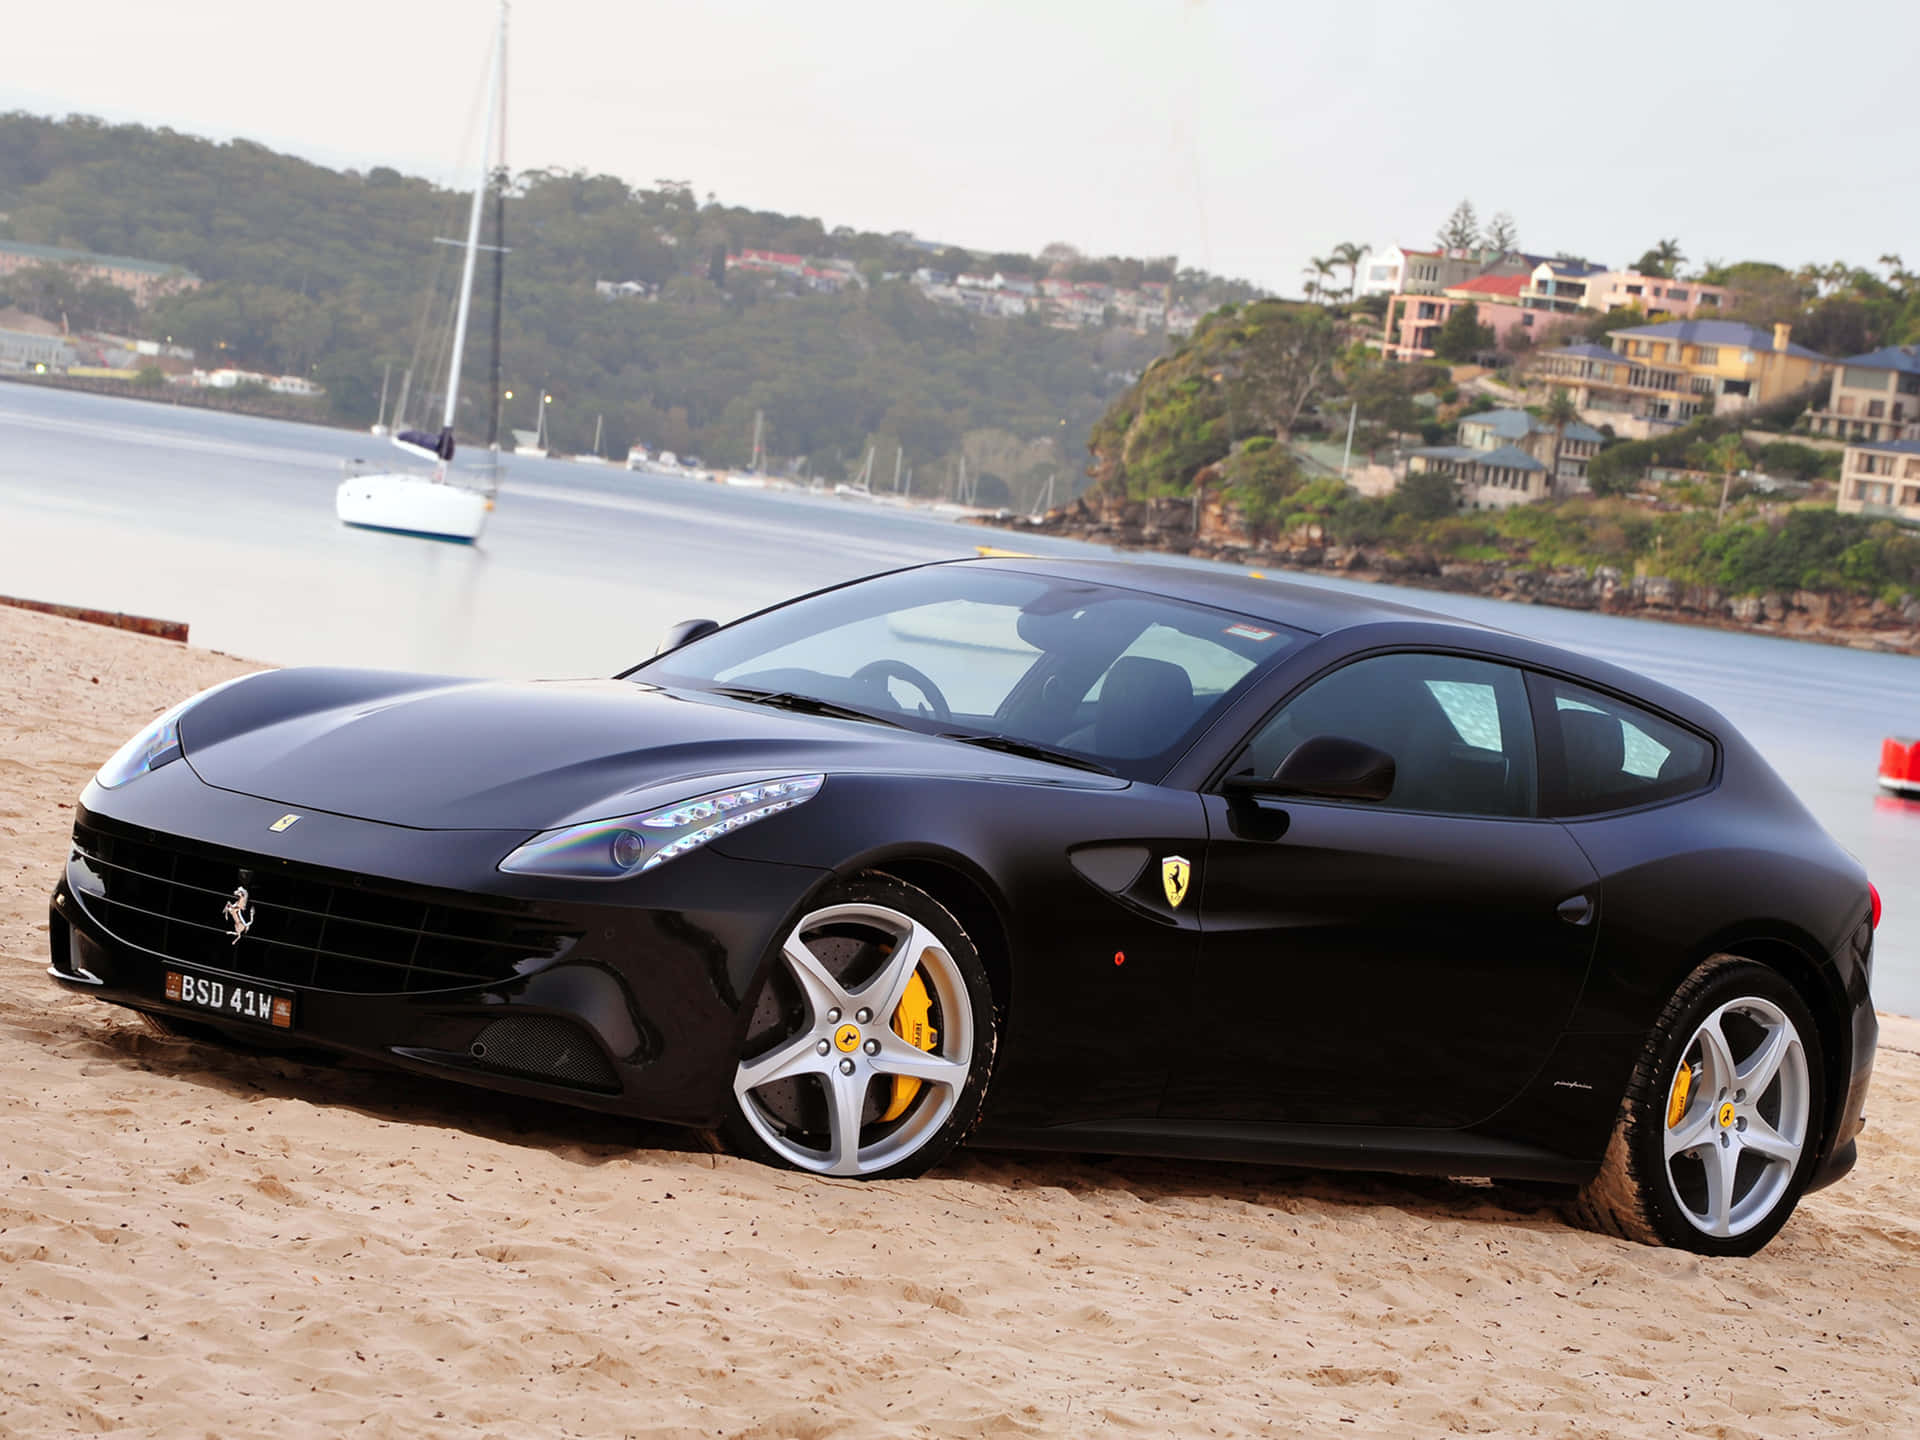 Captivating red Ferrari FF with excellent design and innovation Wallpaper